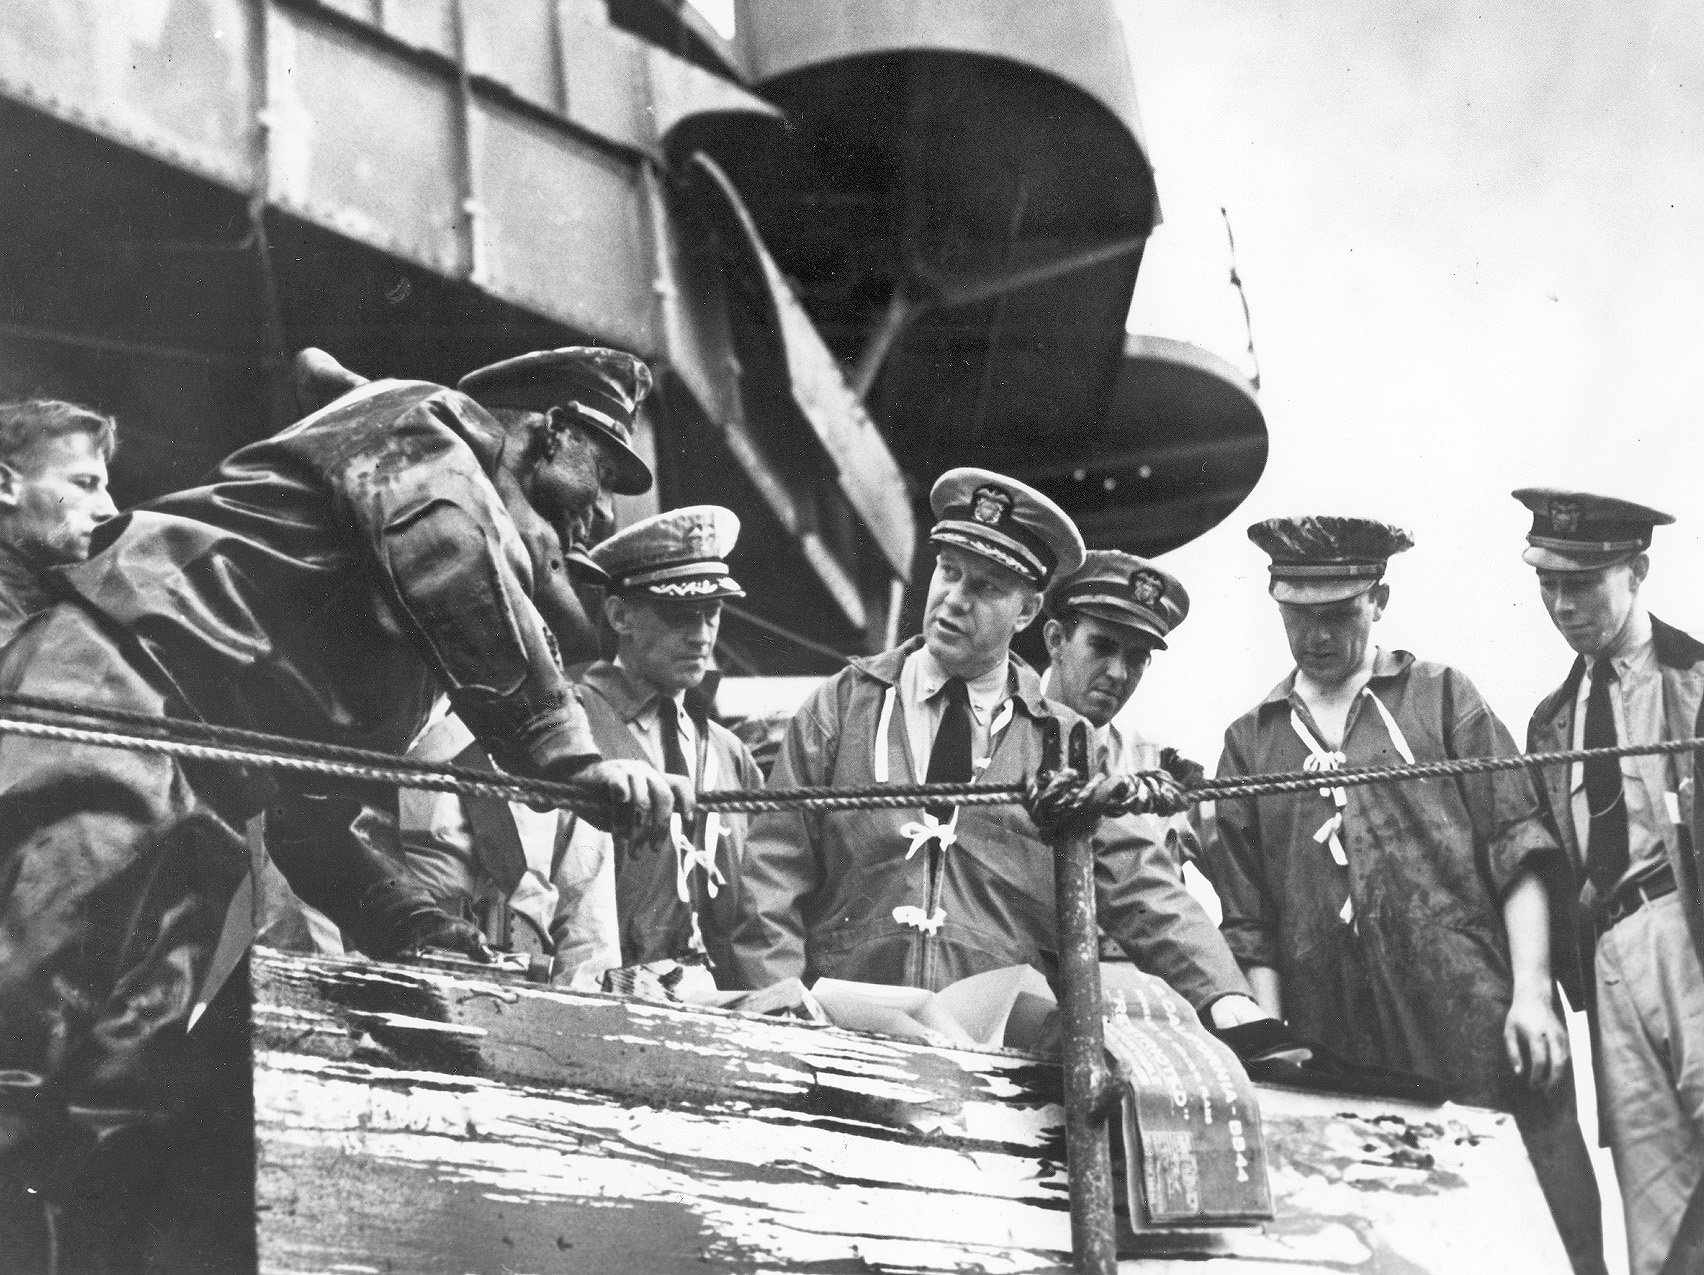 Members of the salvage team assigned to the battleship California discuss their next move. Captain Homer N. Wallin is fourth from the left.